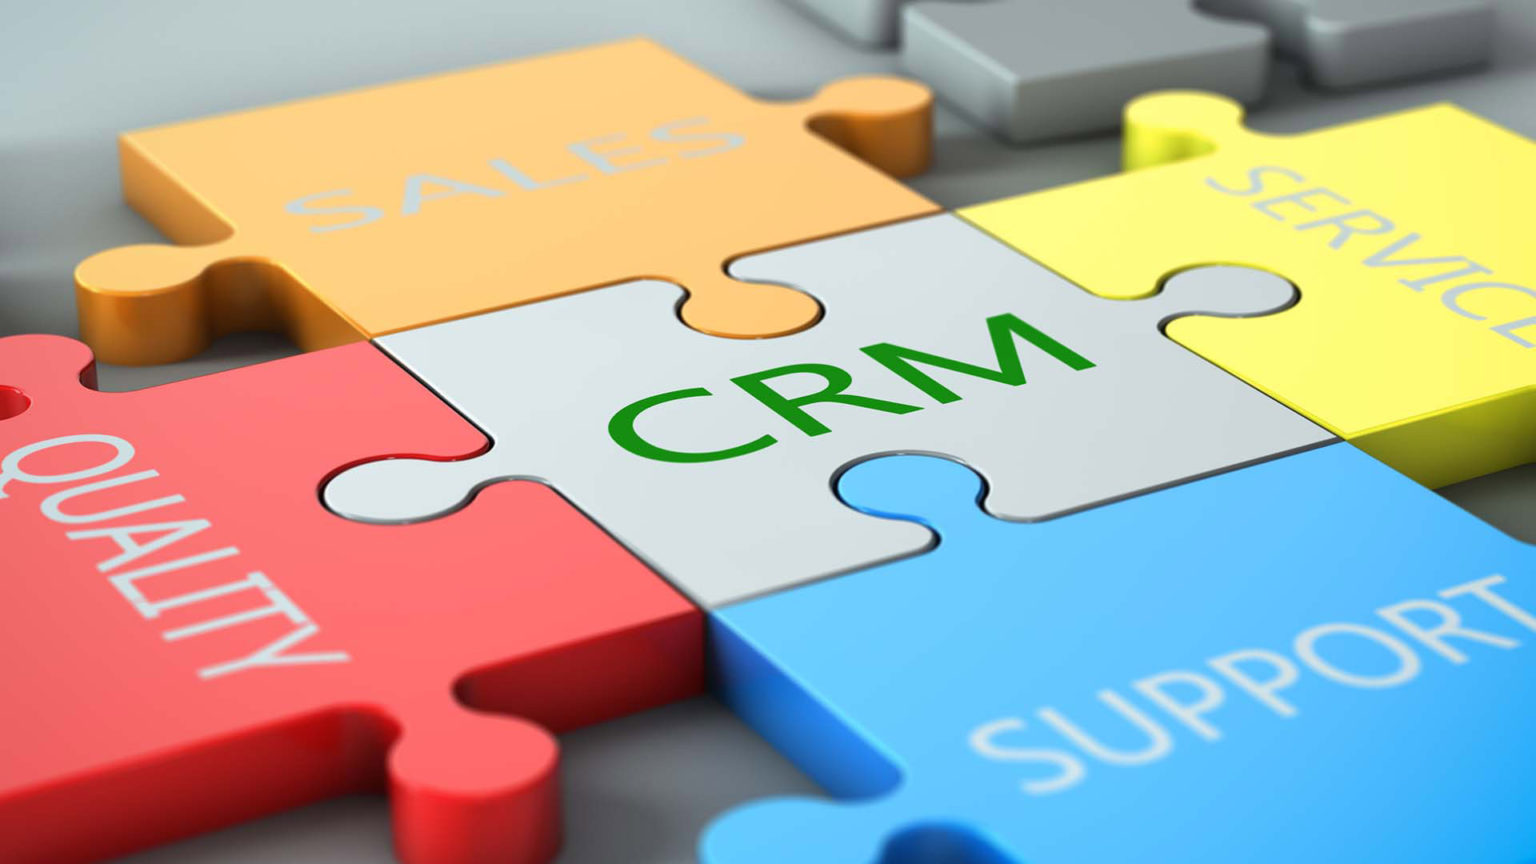 crm and seo detail guide